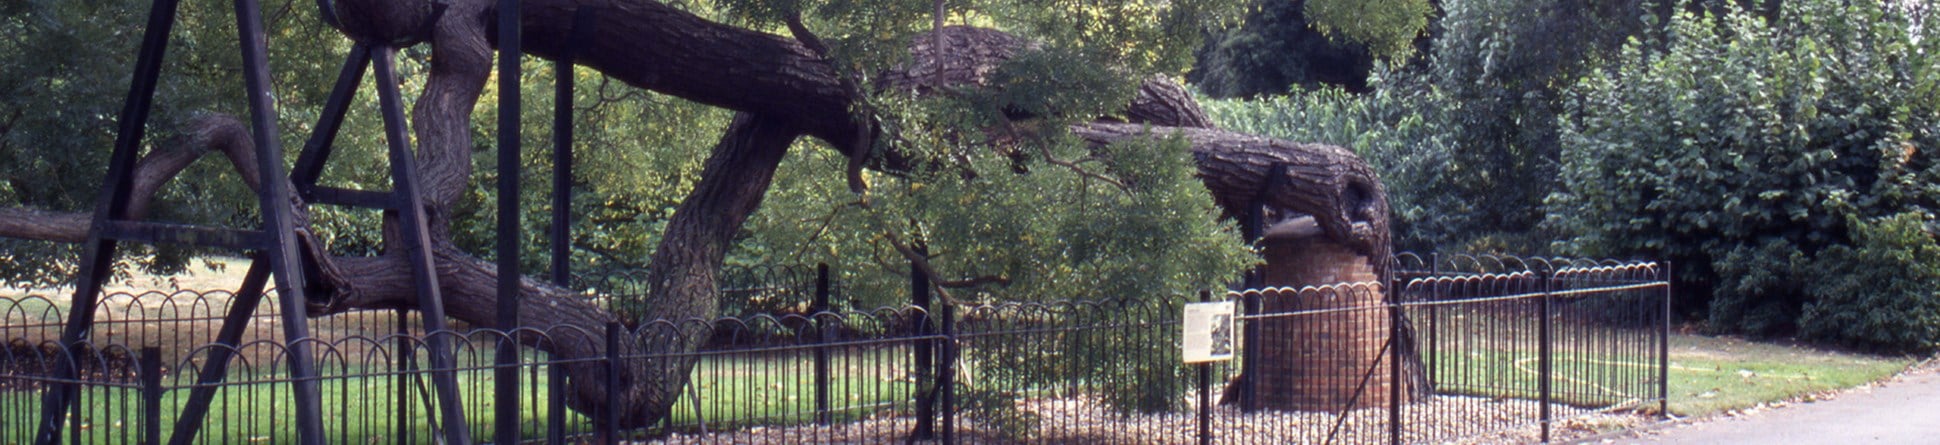 Tree propping at Kew Gardens, Surrey: Although a less favoured option for tree management, it may be considered necessary to allow important trees to be kep safe in well used public areas.